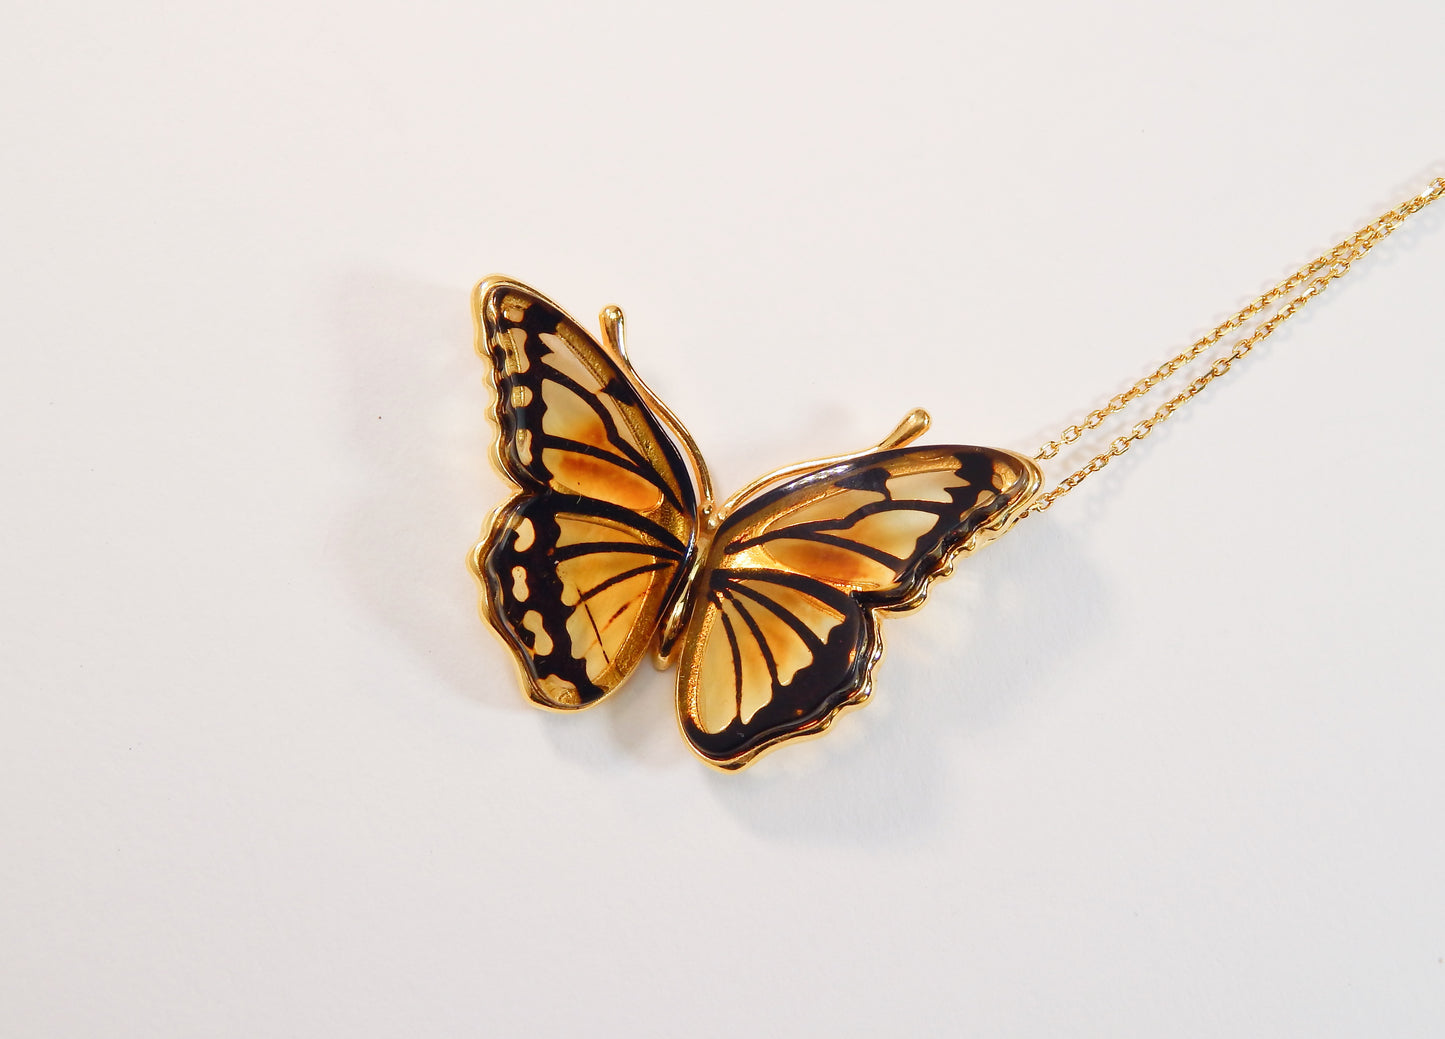 Natural Baltic Amber Monarch Butterfly Pendant Necklace in 14k Gold Plated s925